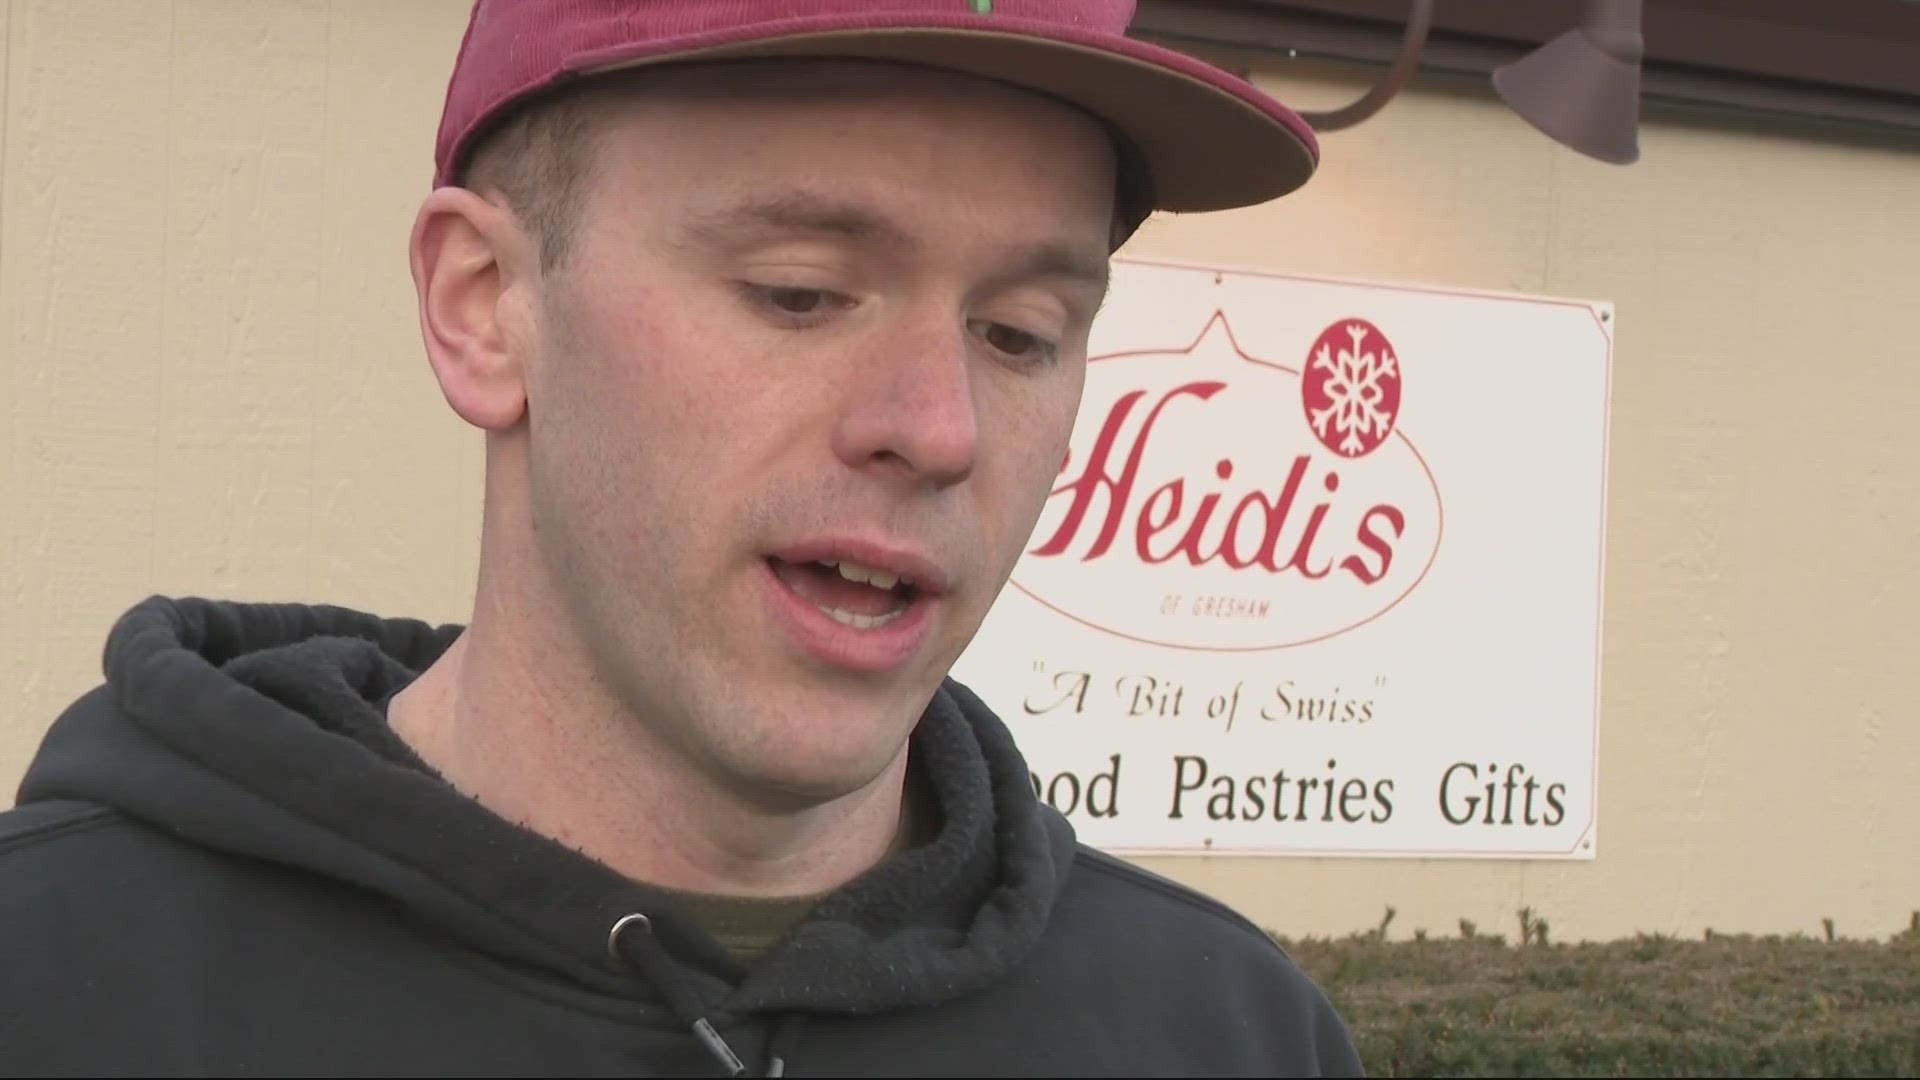 Fire officials tell KGW the fire at Heidi's was one of several fires in the area that morning -all under investigation.